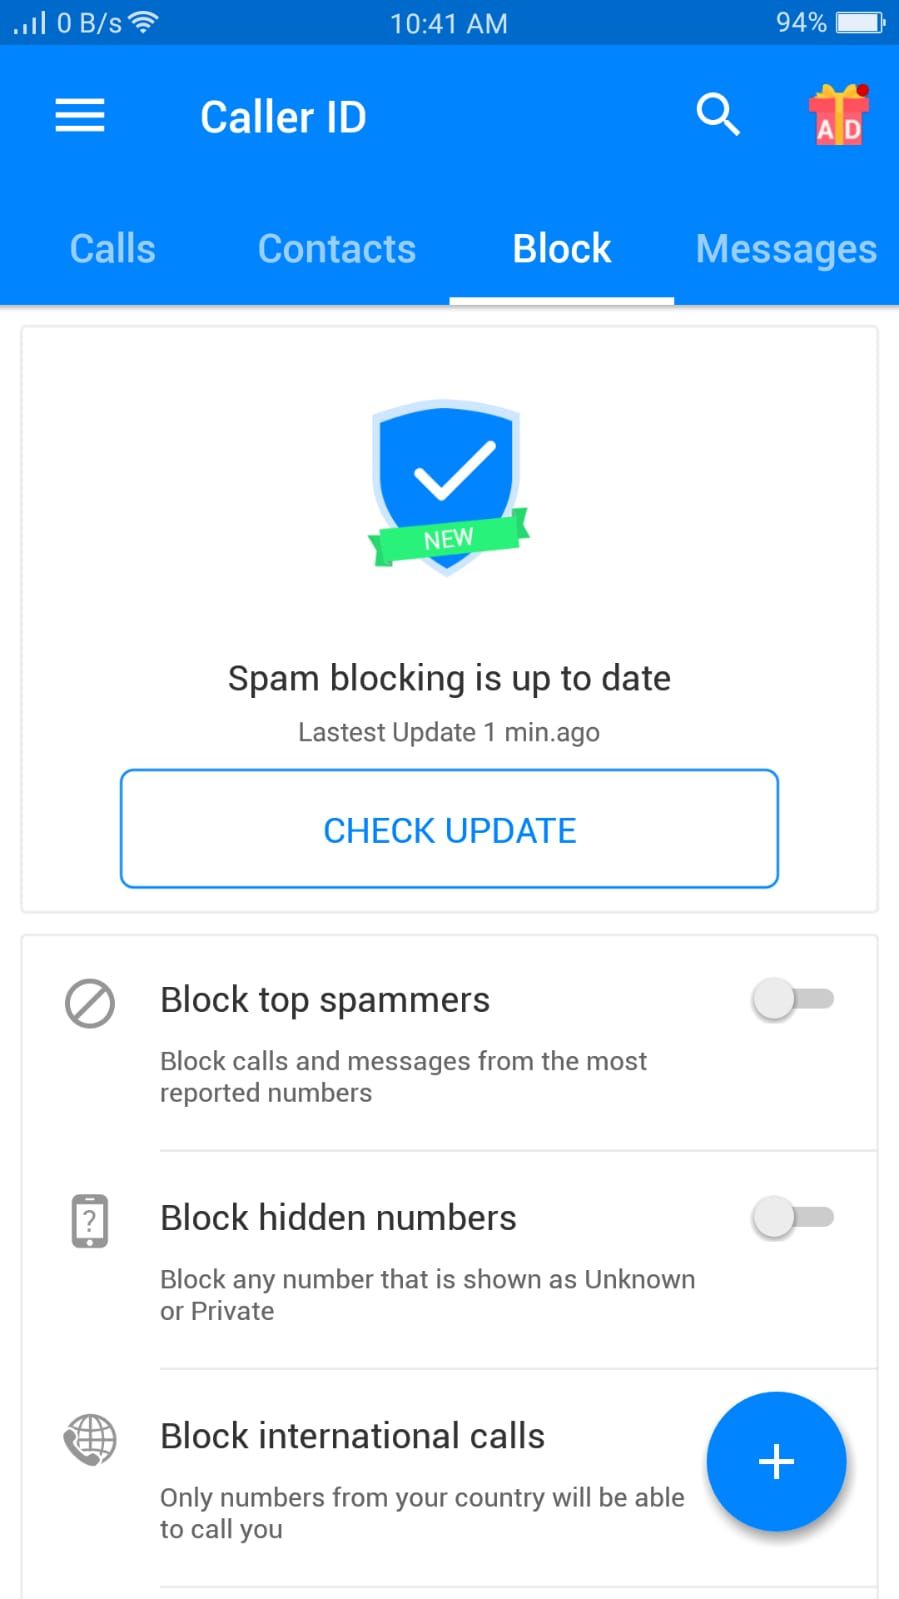 Caller ID - Spam Blocking Page